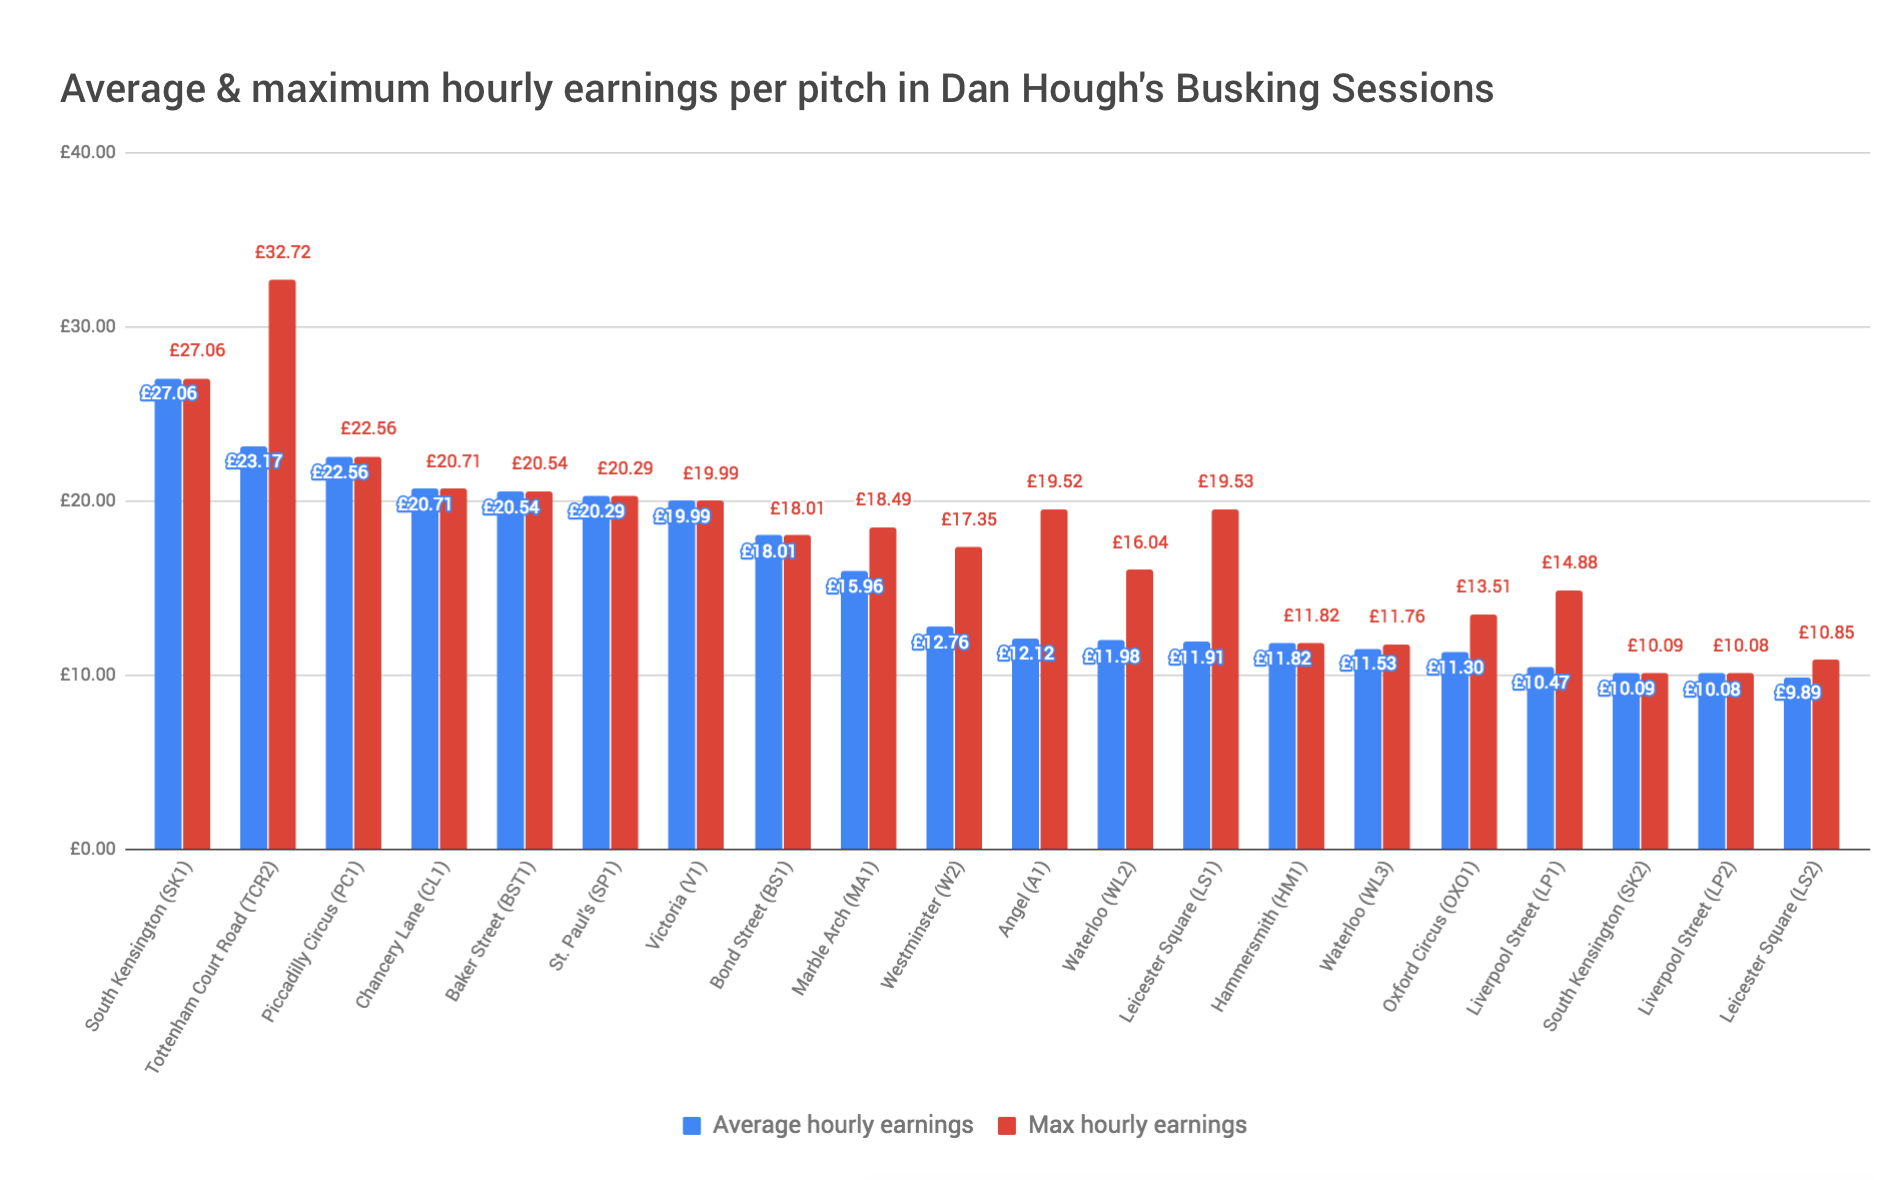 The difference between average and highest hourly earnings at a station can be huge.